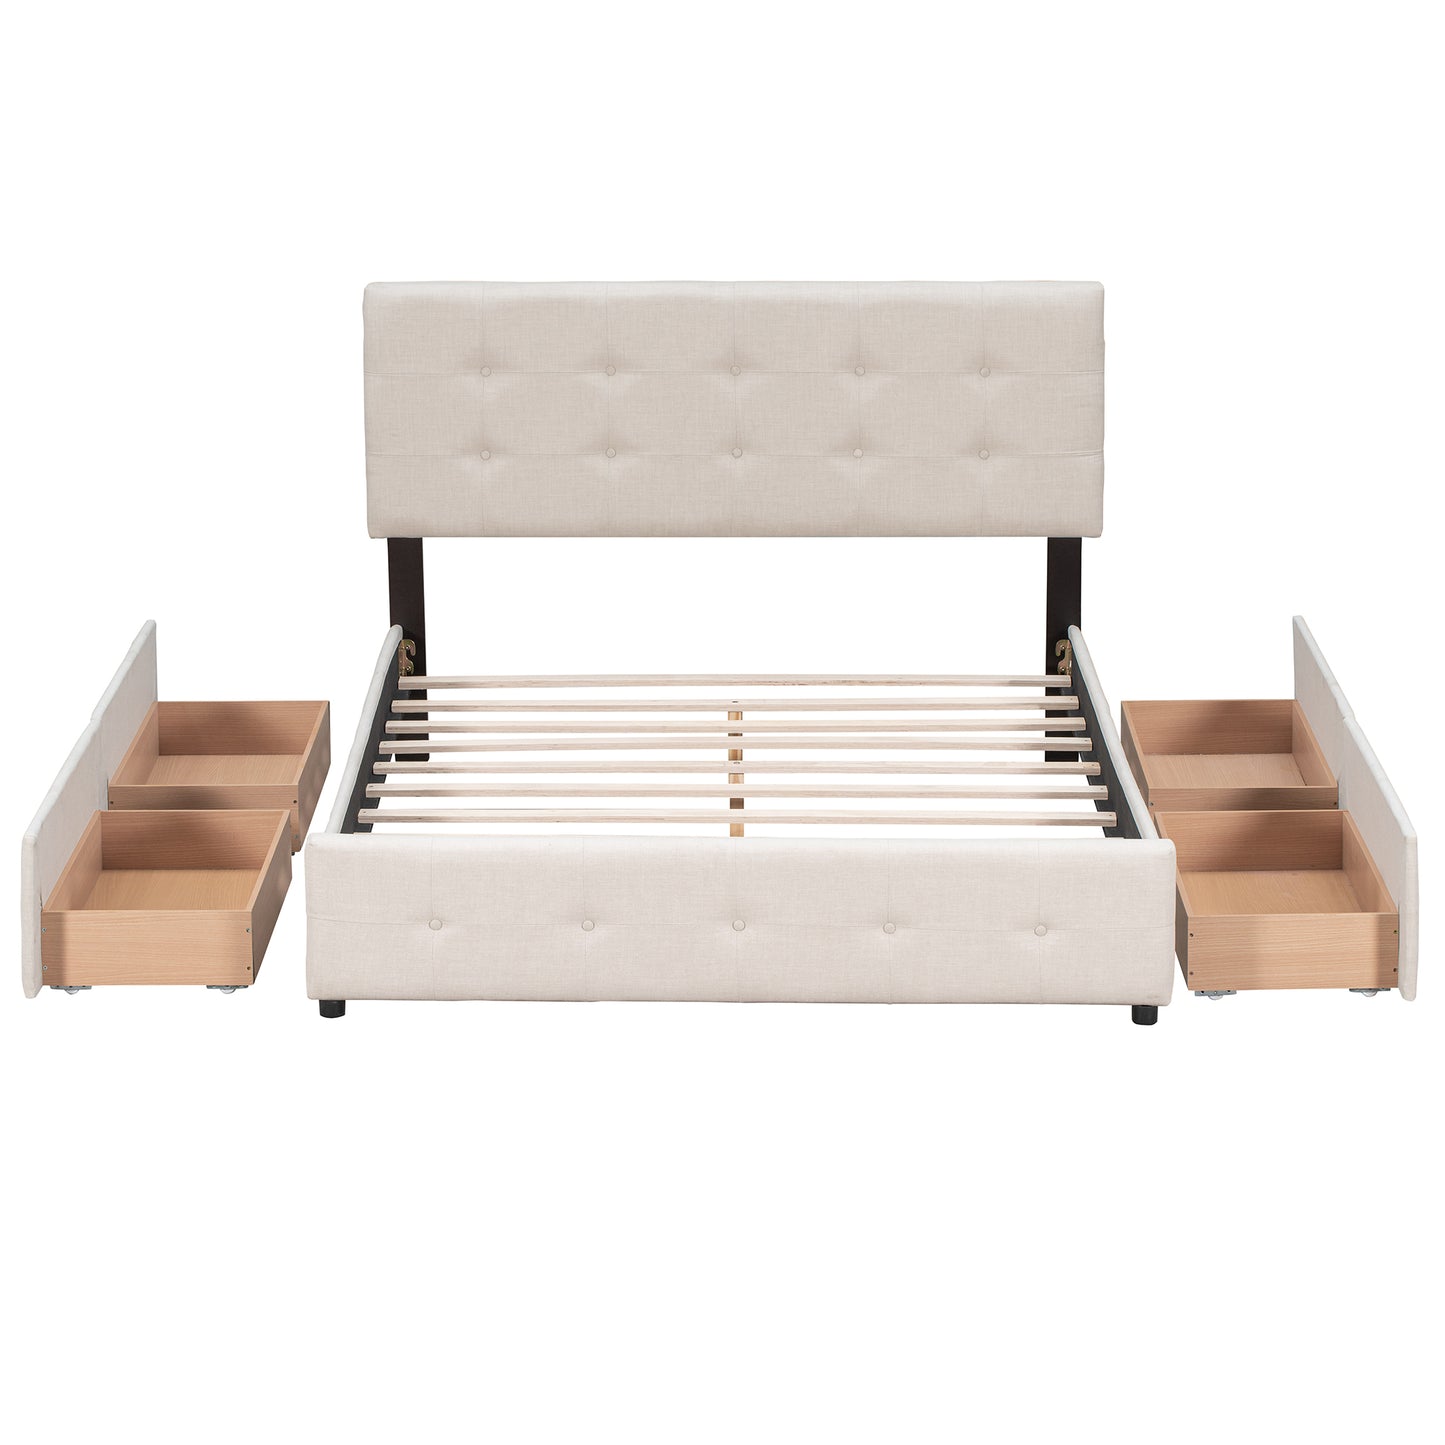 Queen-Size Beige Upholstered Platform Bed with 4 Side Drawers and Button-Tufted Headboard